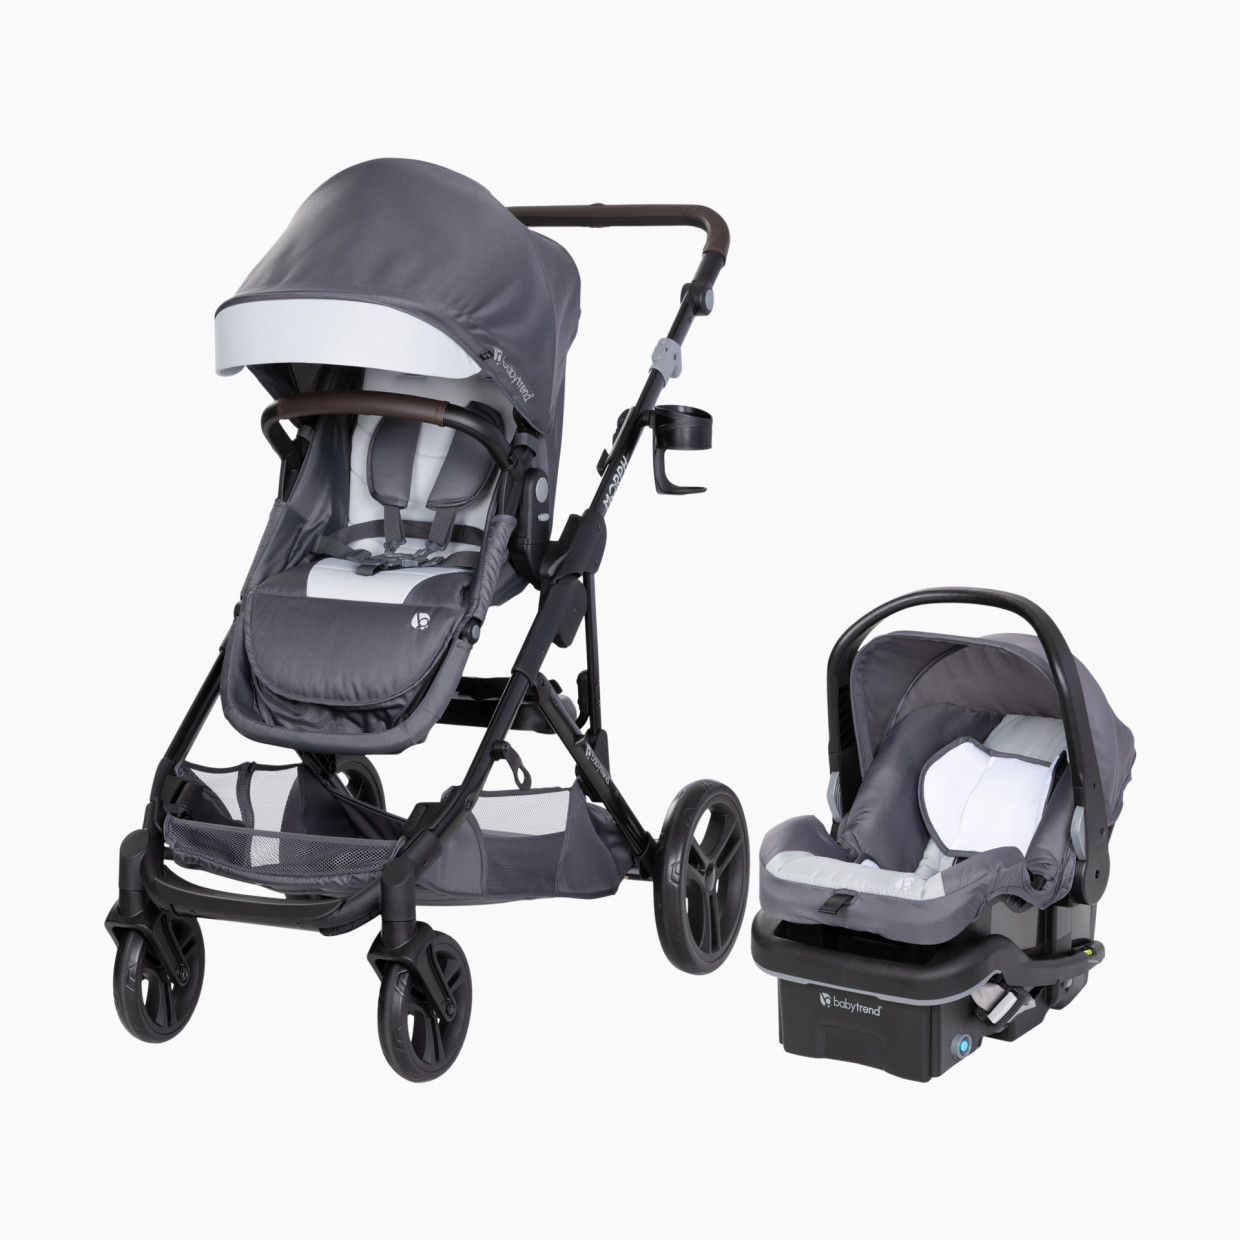 Baby Trend Morph Single to Double Modular Travel System - Dash Grey.